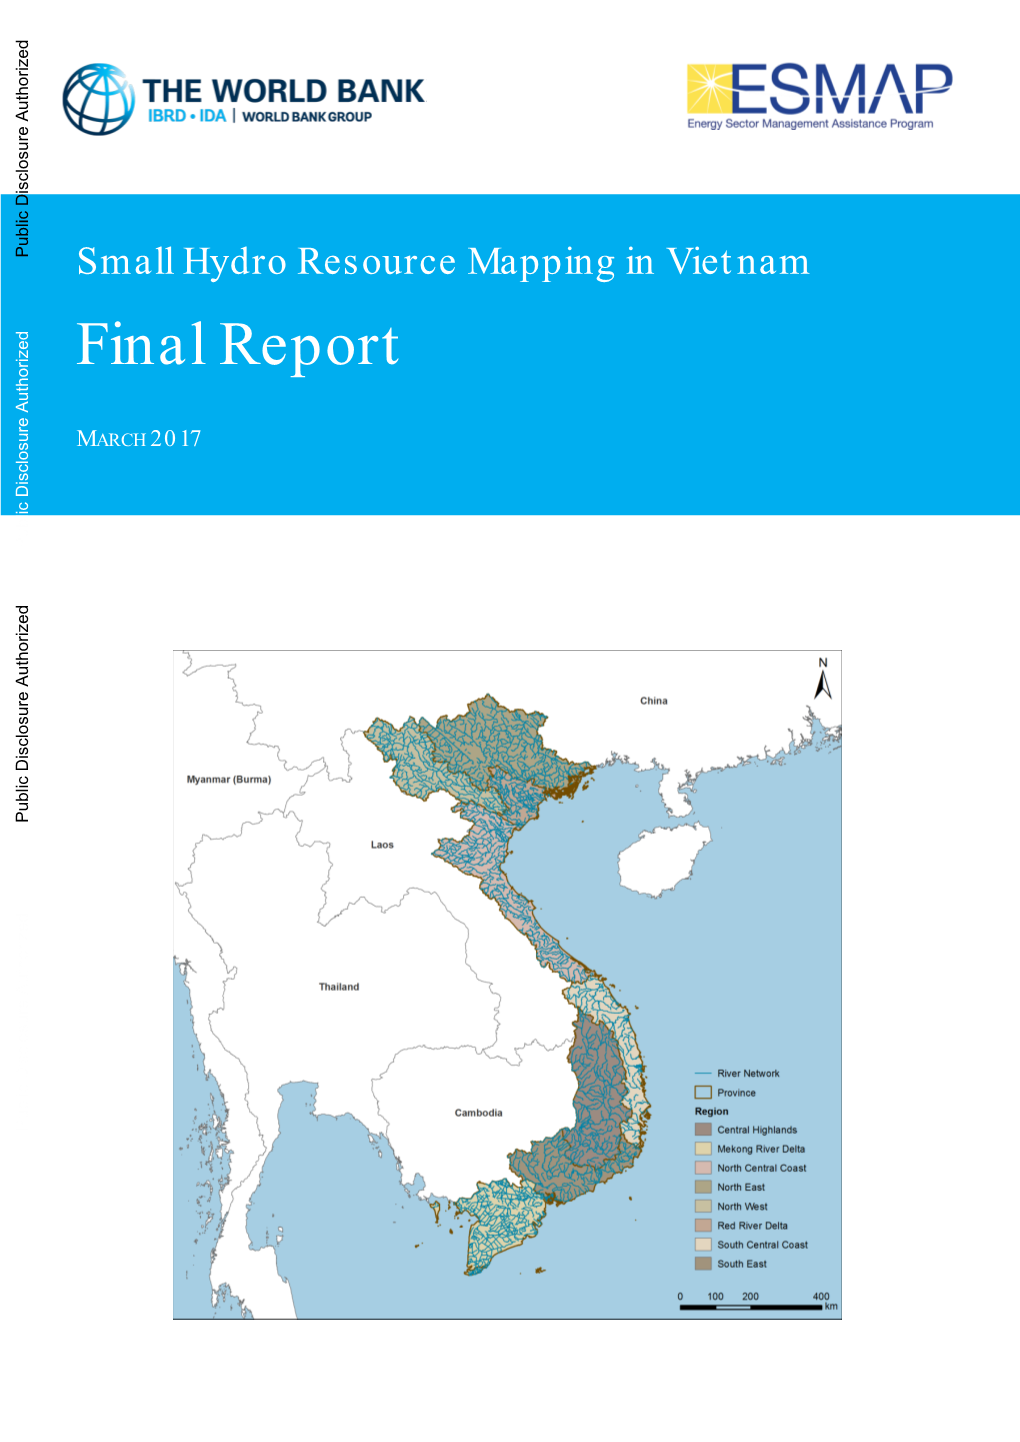 Small Hydropower Mapping and Planning in Vietnam